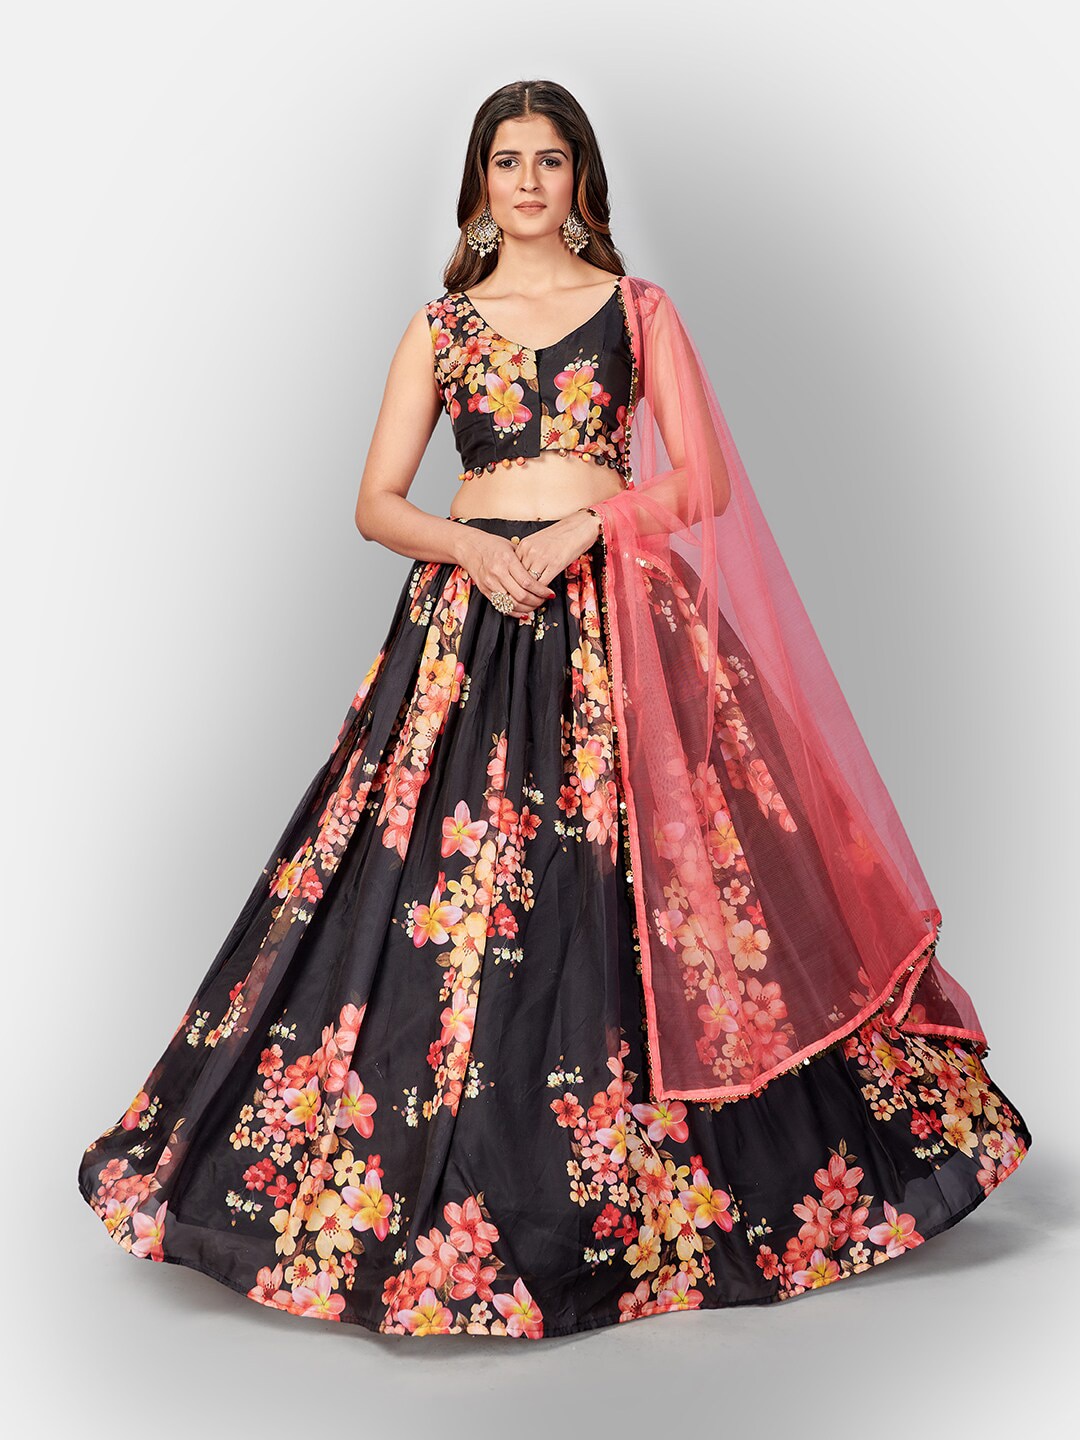 SHOPGARB Black & Pink Printed Semi-Stitched Lehenga & Unstitched Blouse With Dupatta Price in India